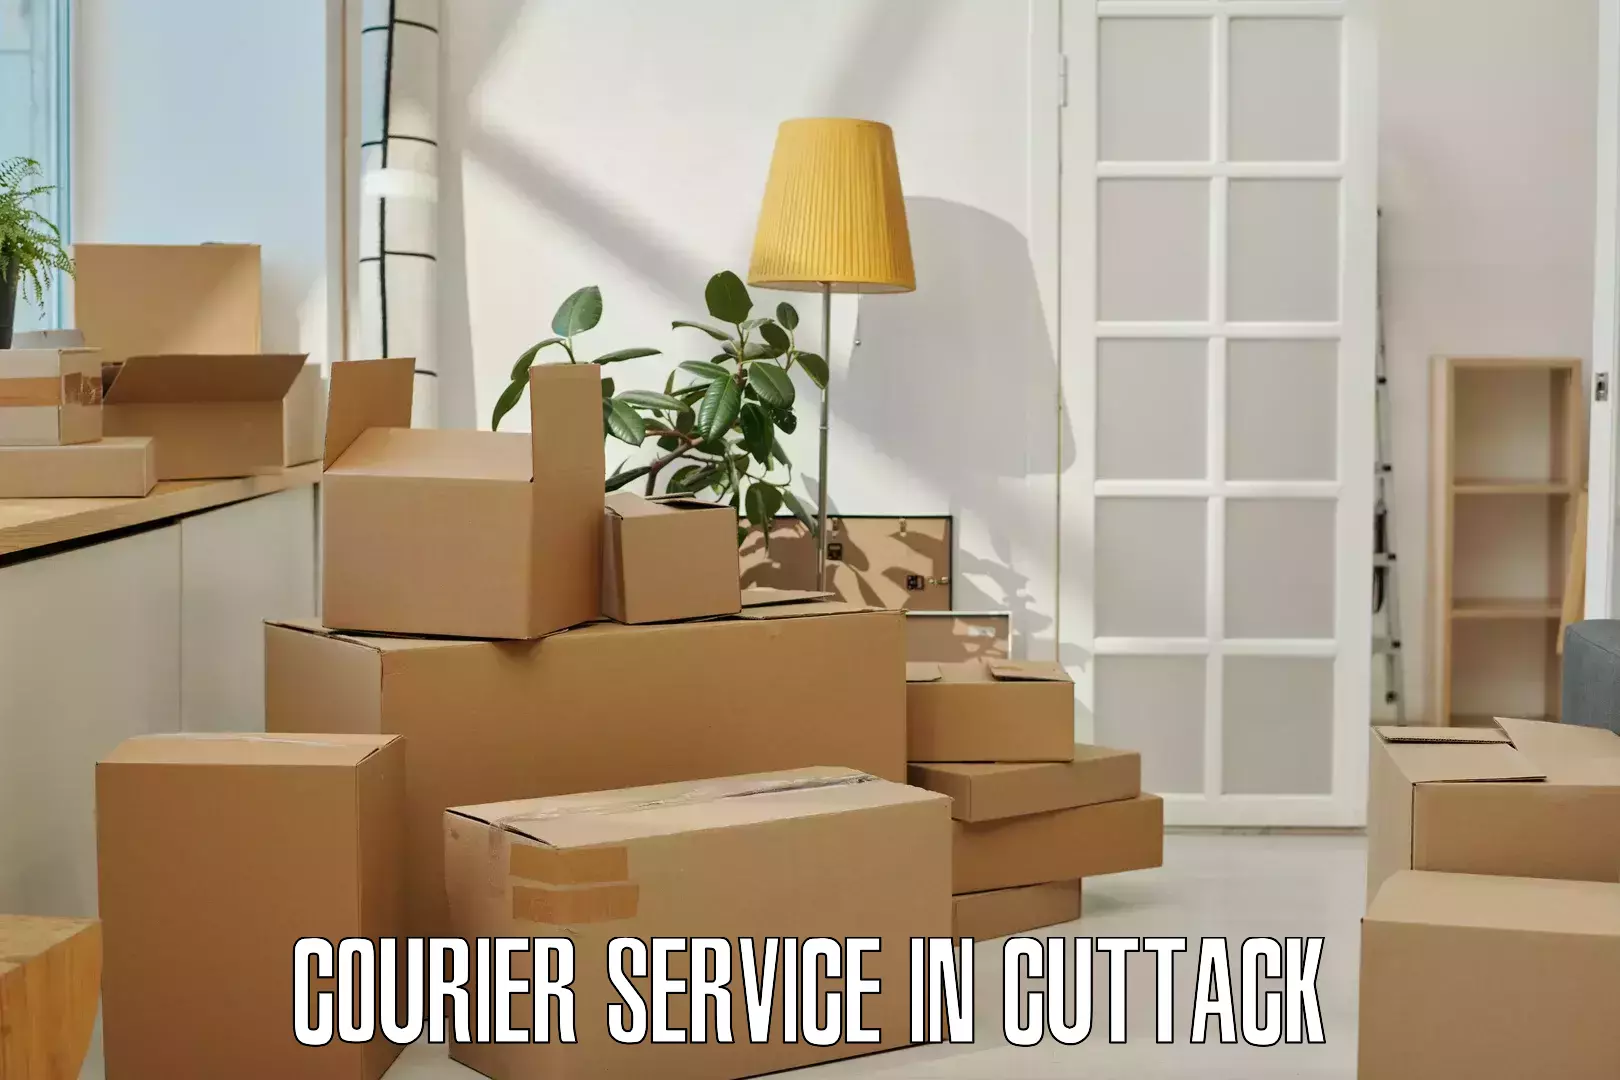 Track and trace shipping in Cuttack